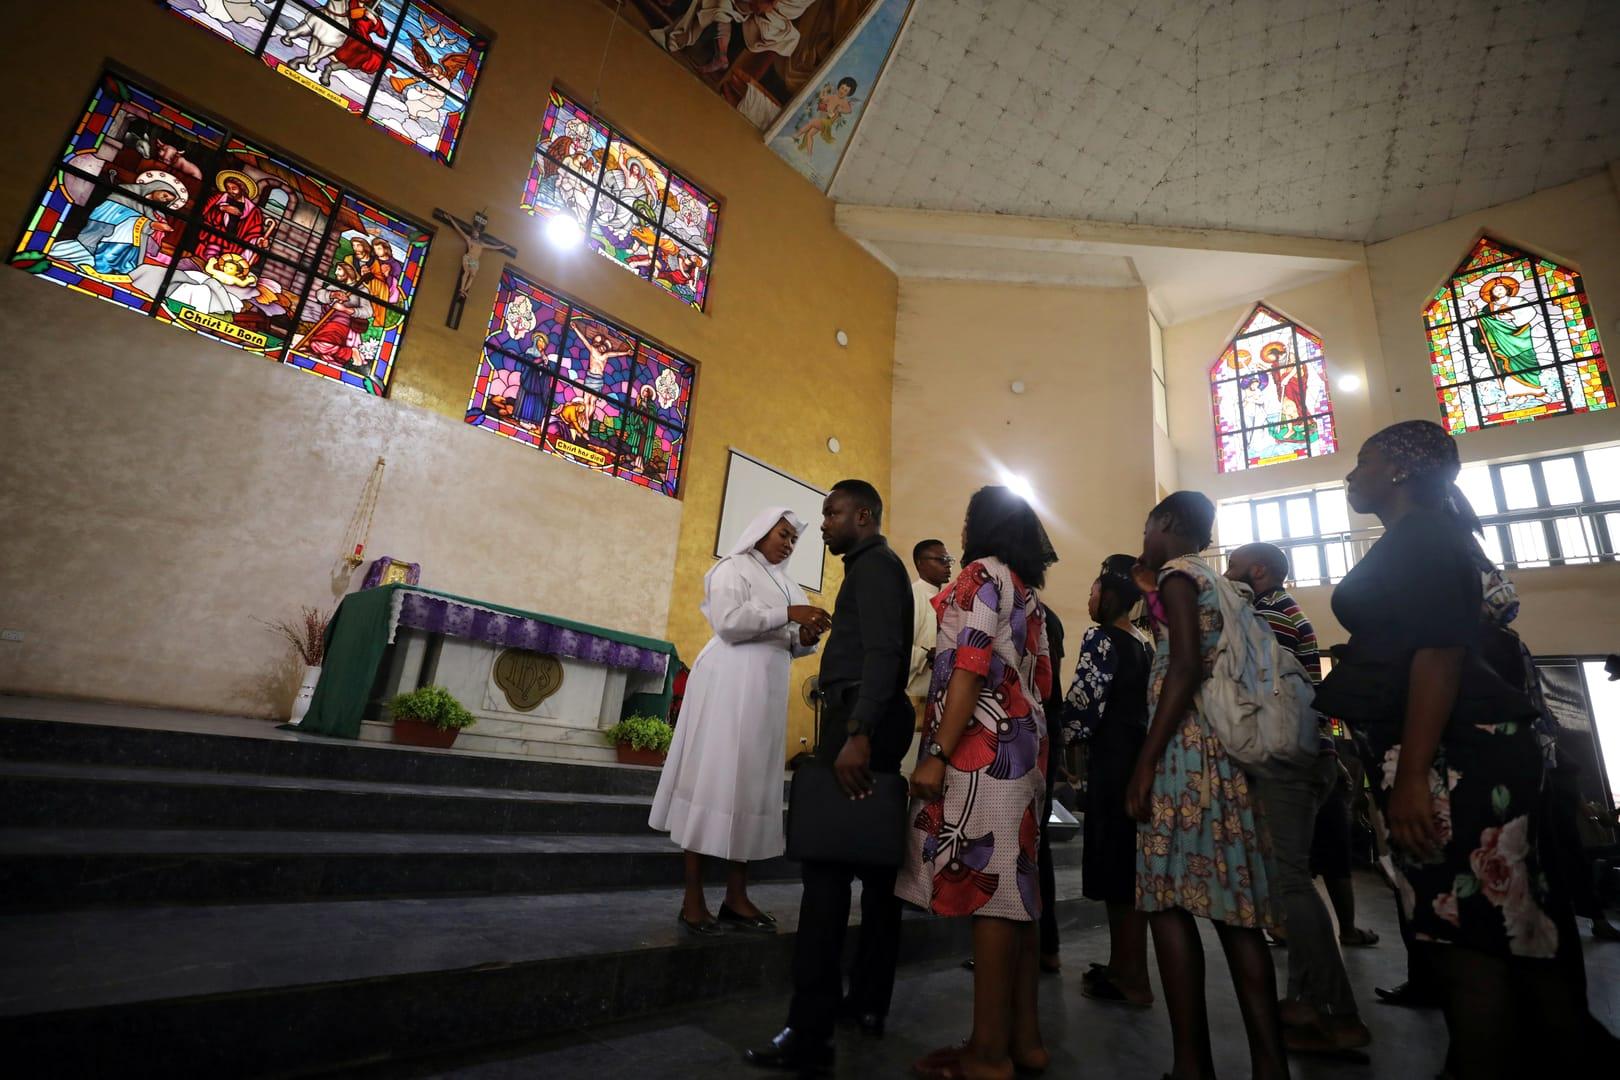 Despite persecution, Christians in Africa not losing hope